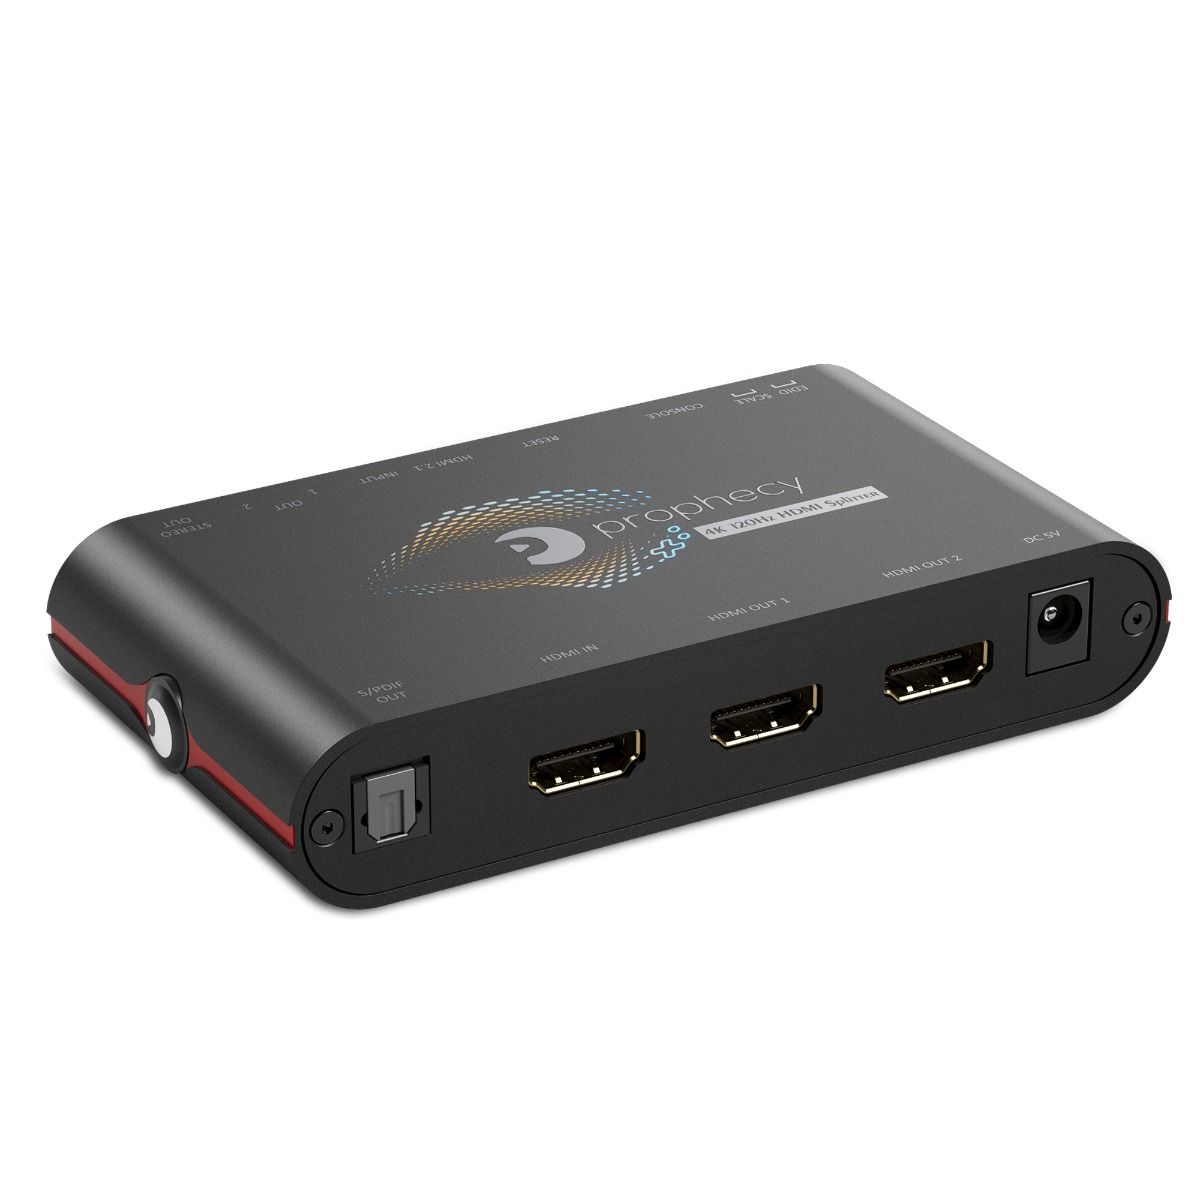 2 Way HDMI Splitter: Connect Multiple Devices to a Single HDMI Port —  Conversions Technology